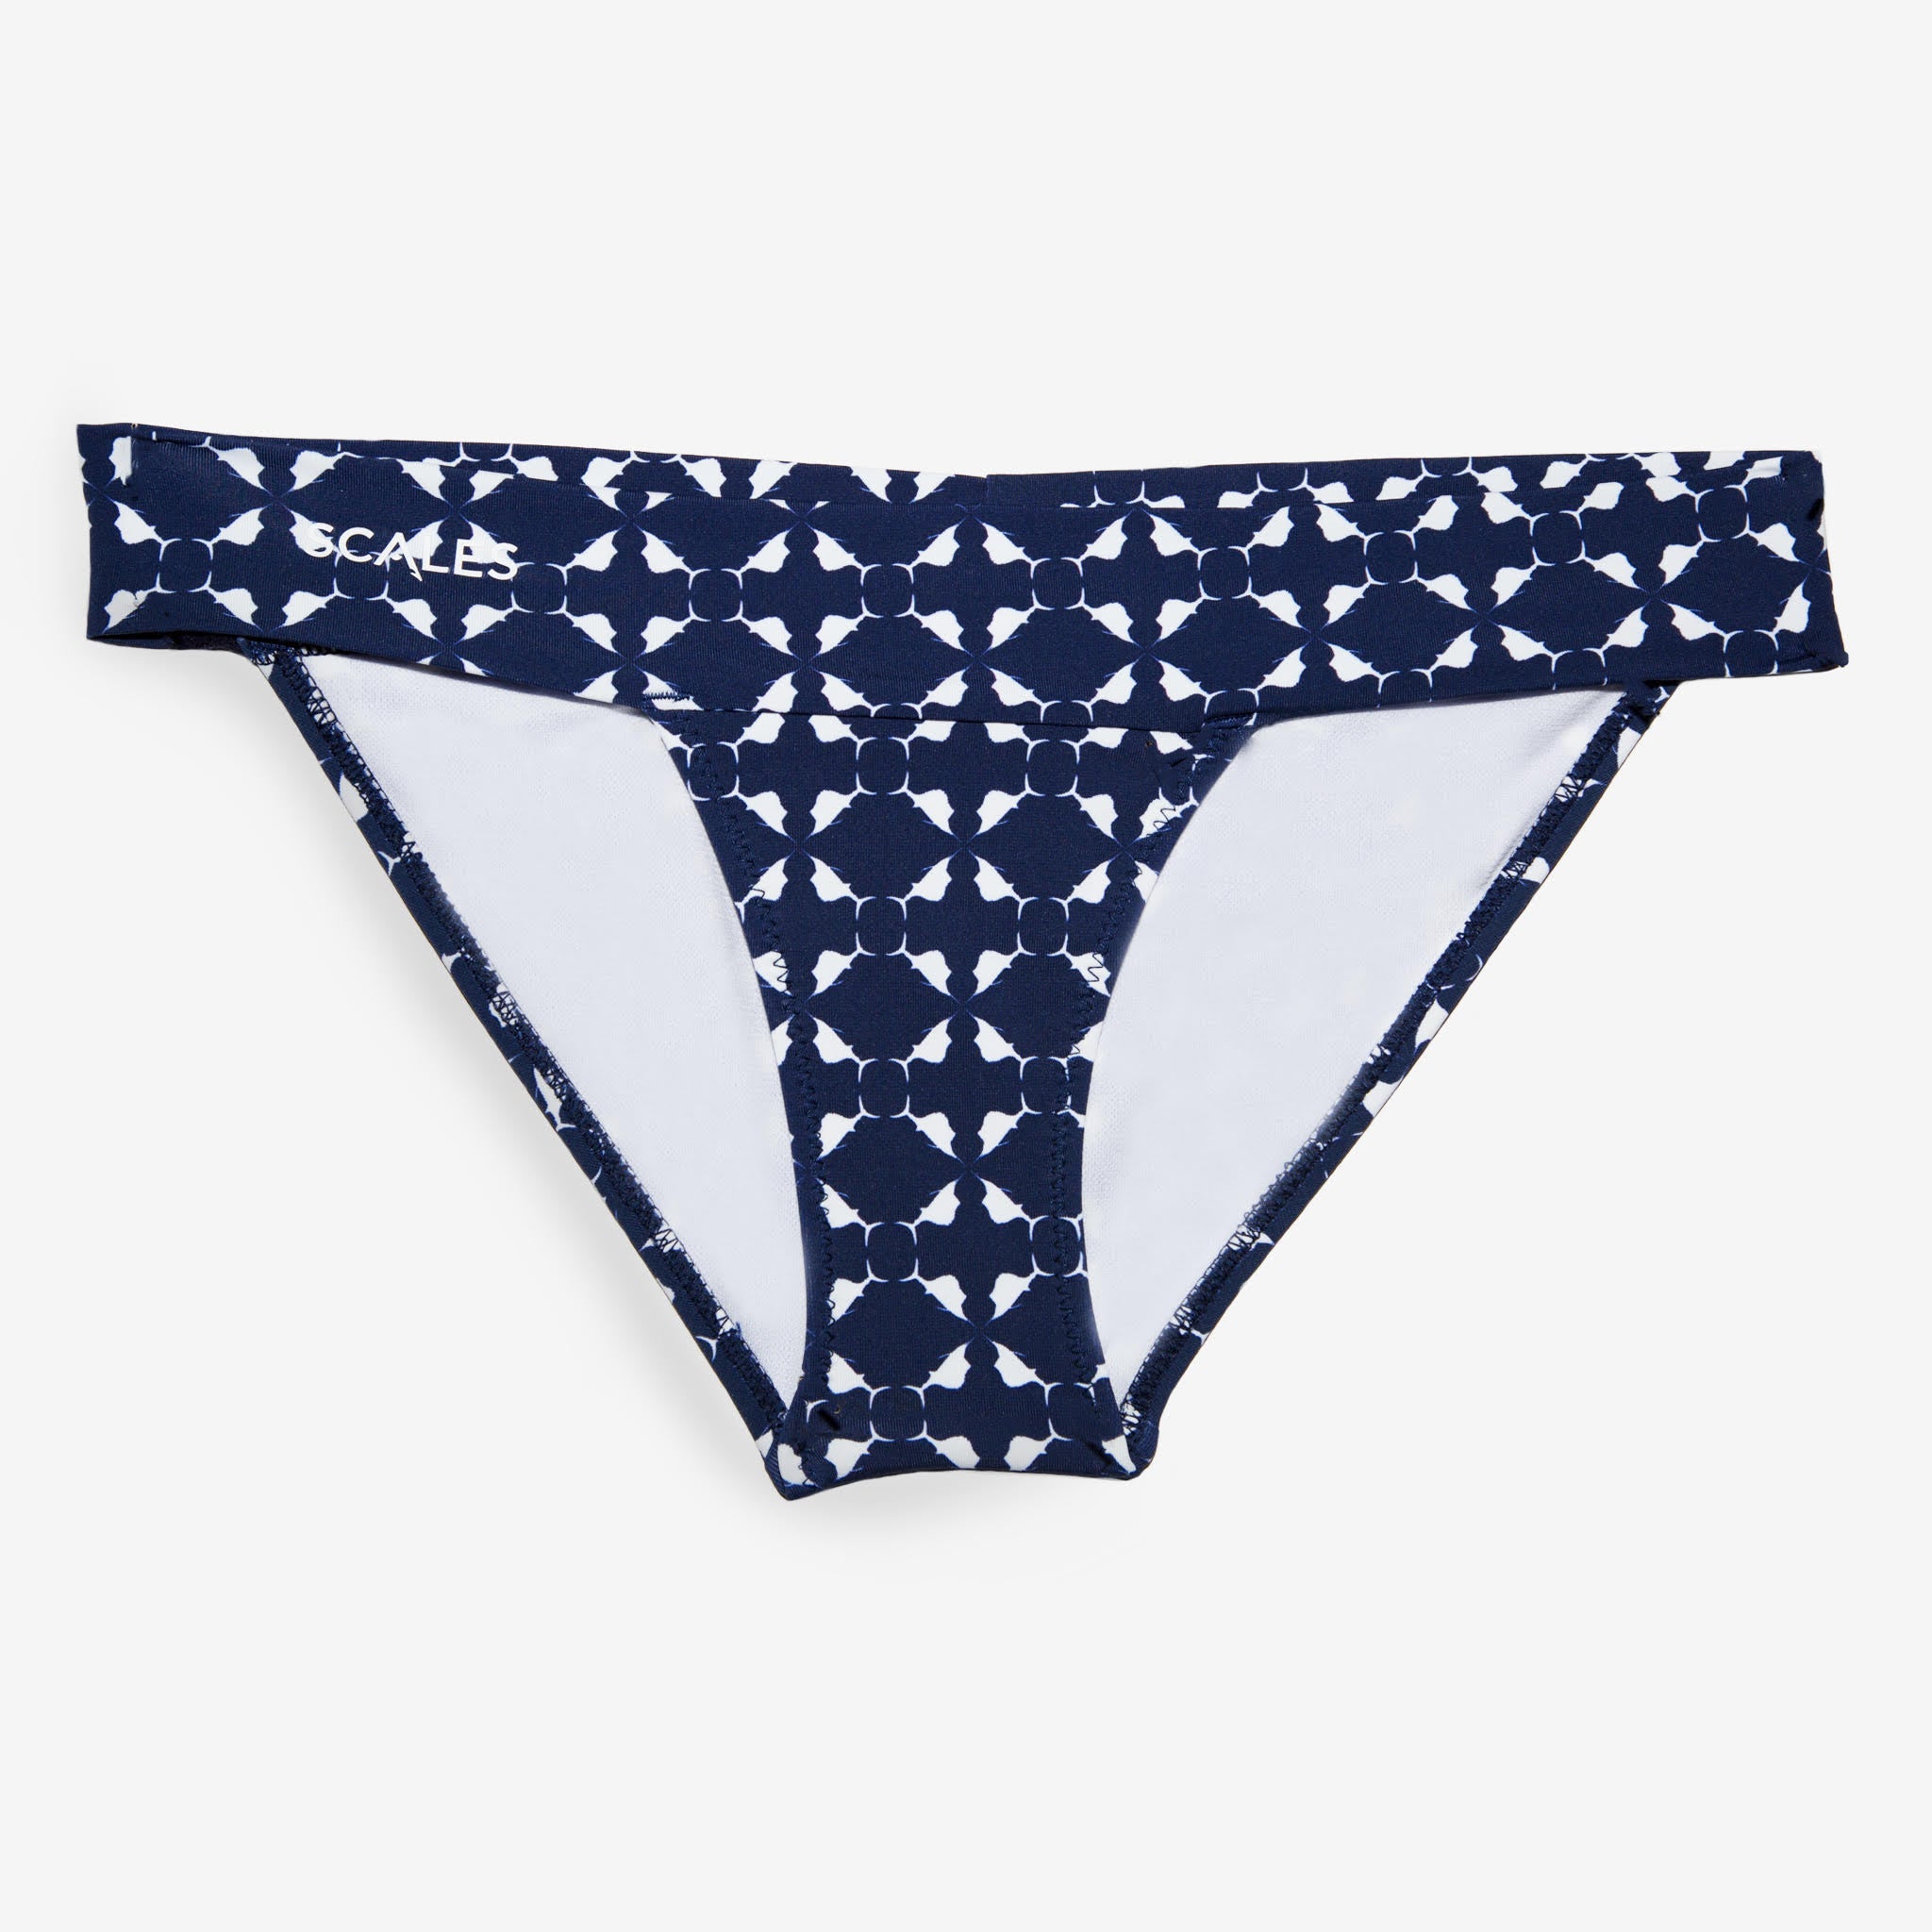 Scales Women's Swimwear Nautical Sailfish Banded Bottom Added Coverage in Navy Size L